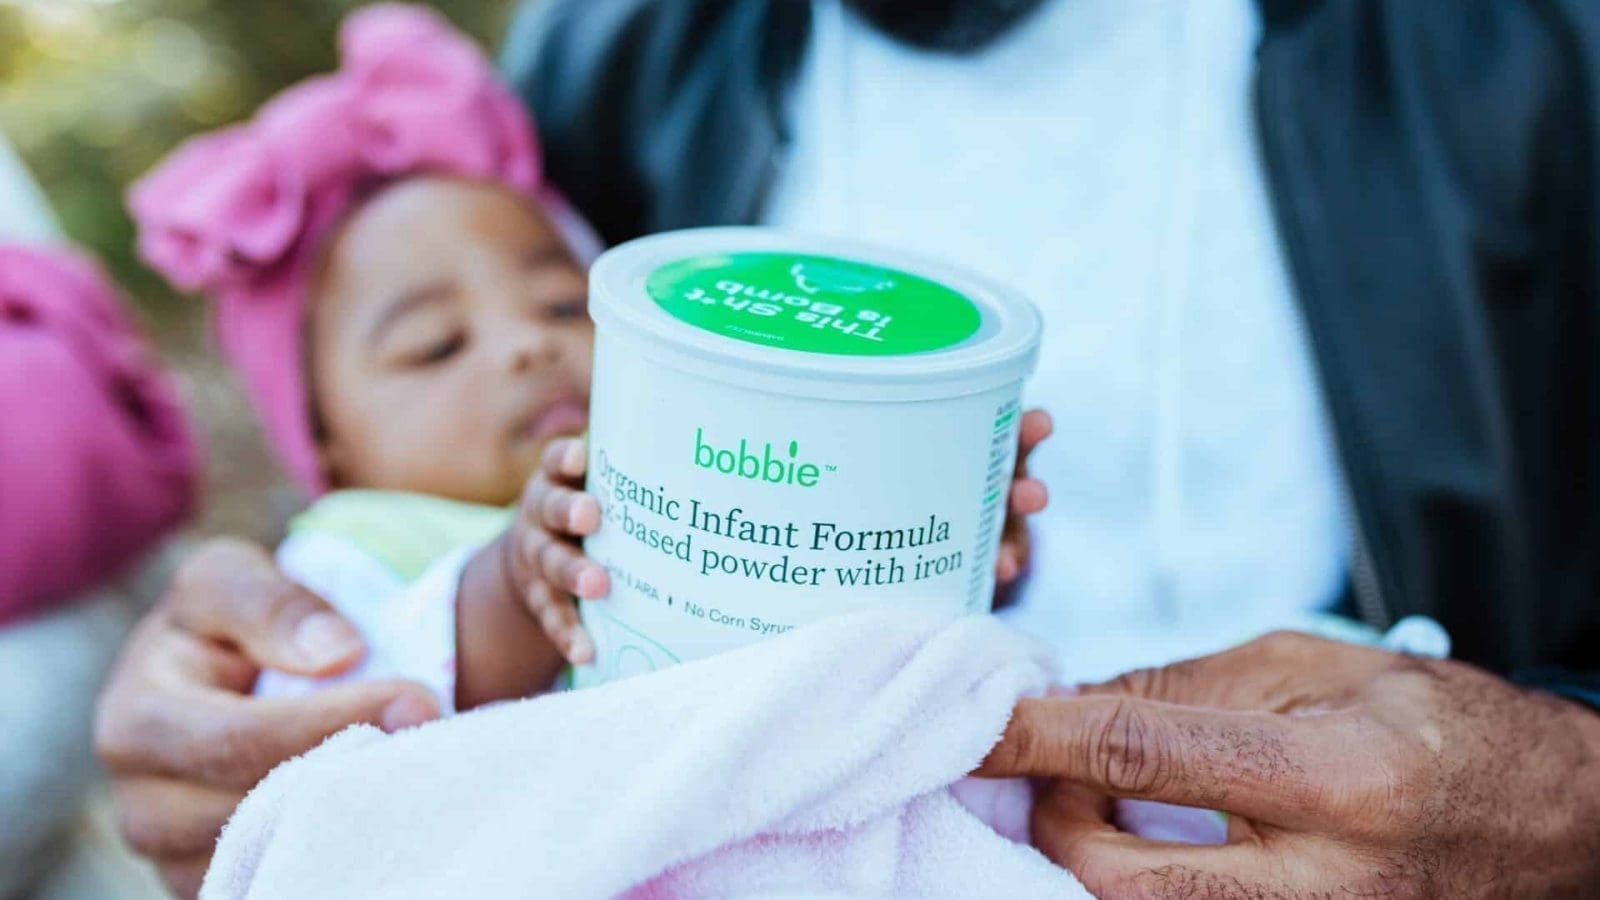 Bobbie banks on D2C model to augment its share in European-style infant formula market